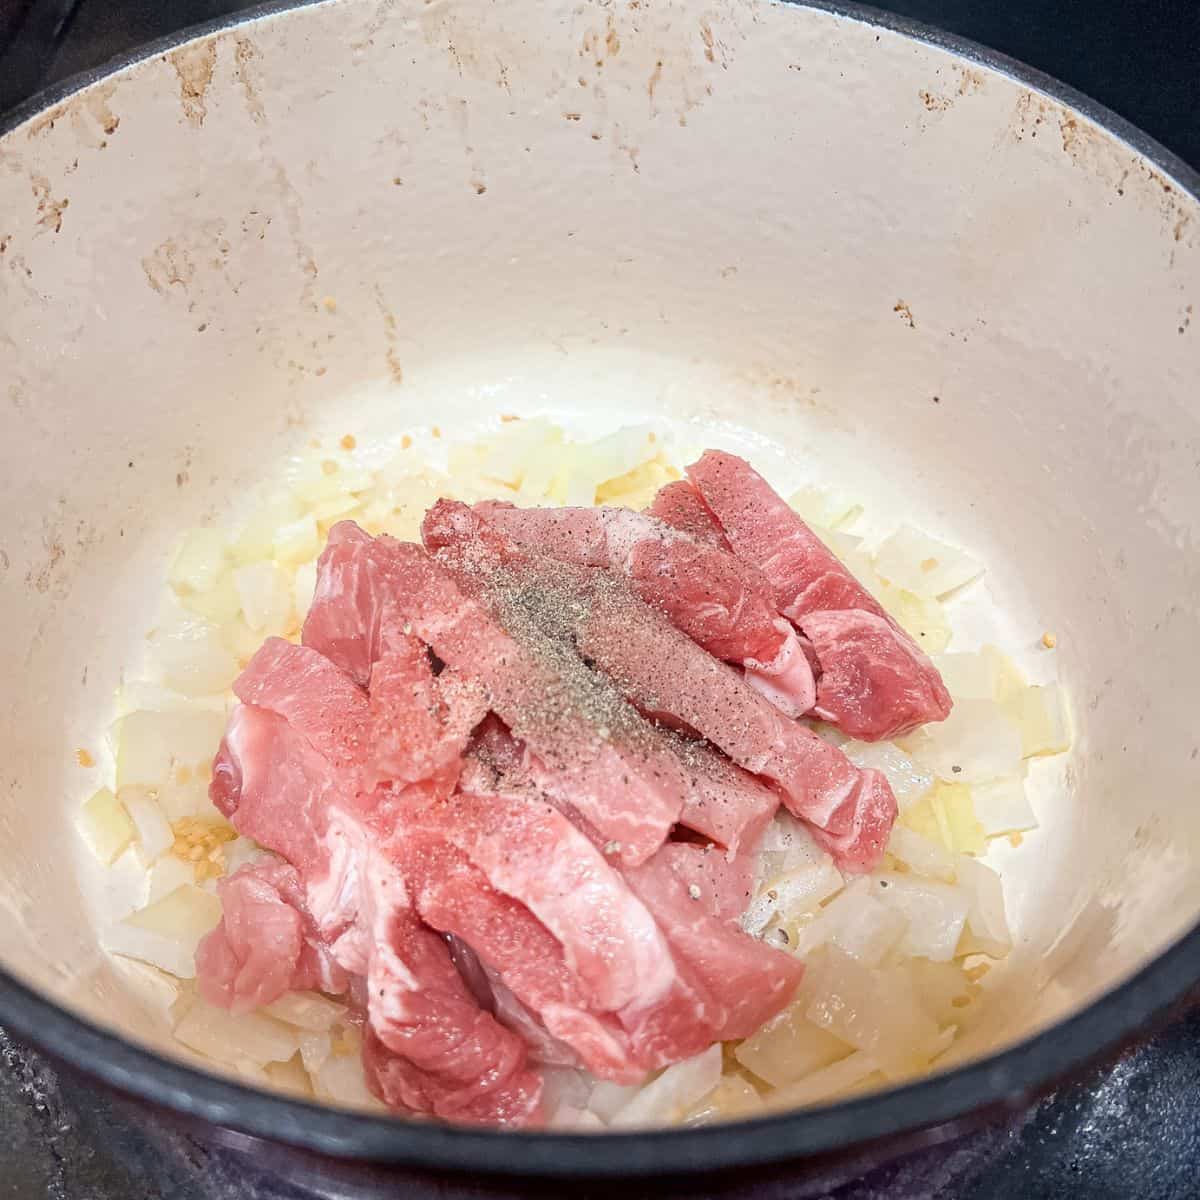 Cooking onion, garlic and pork in a dutch oven.